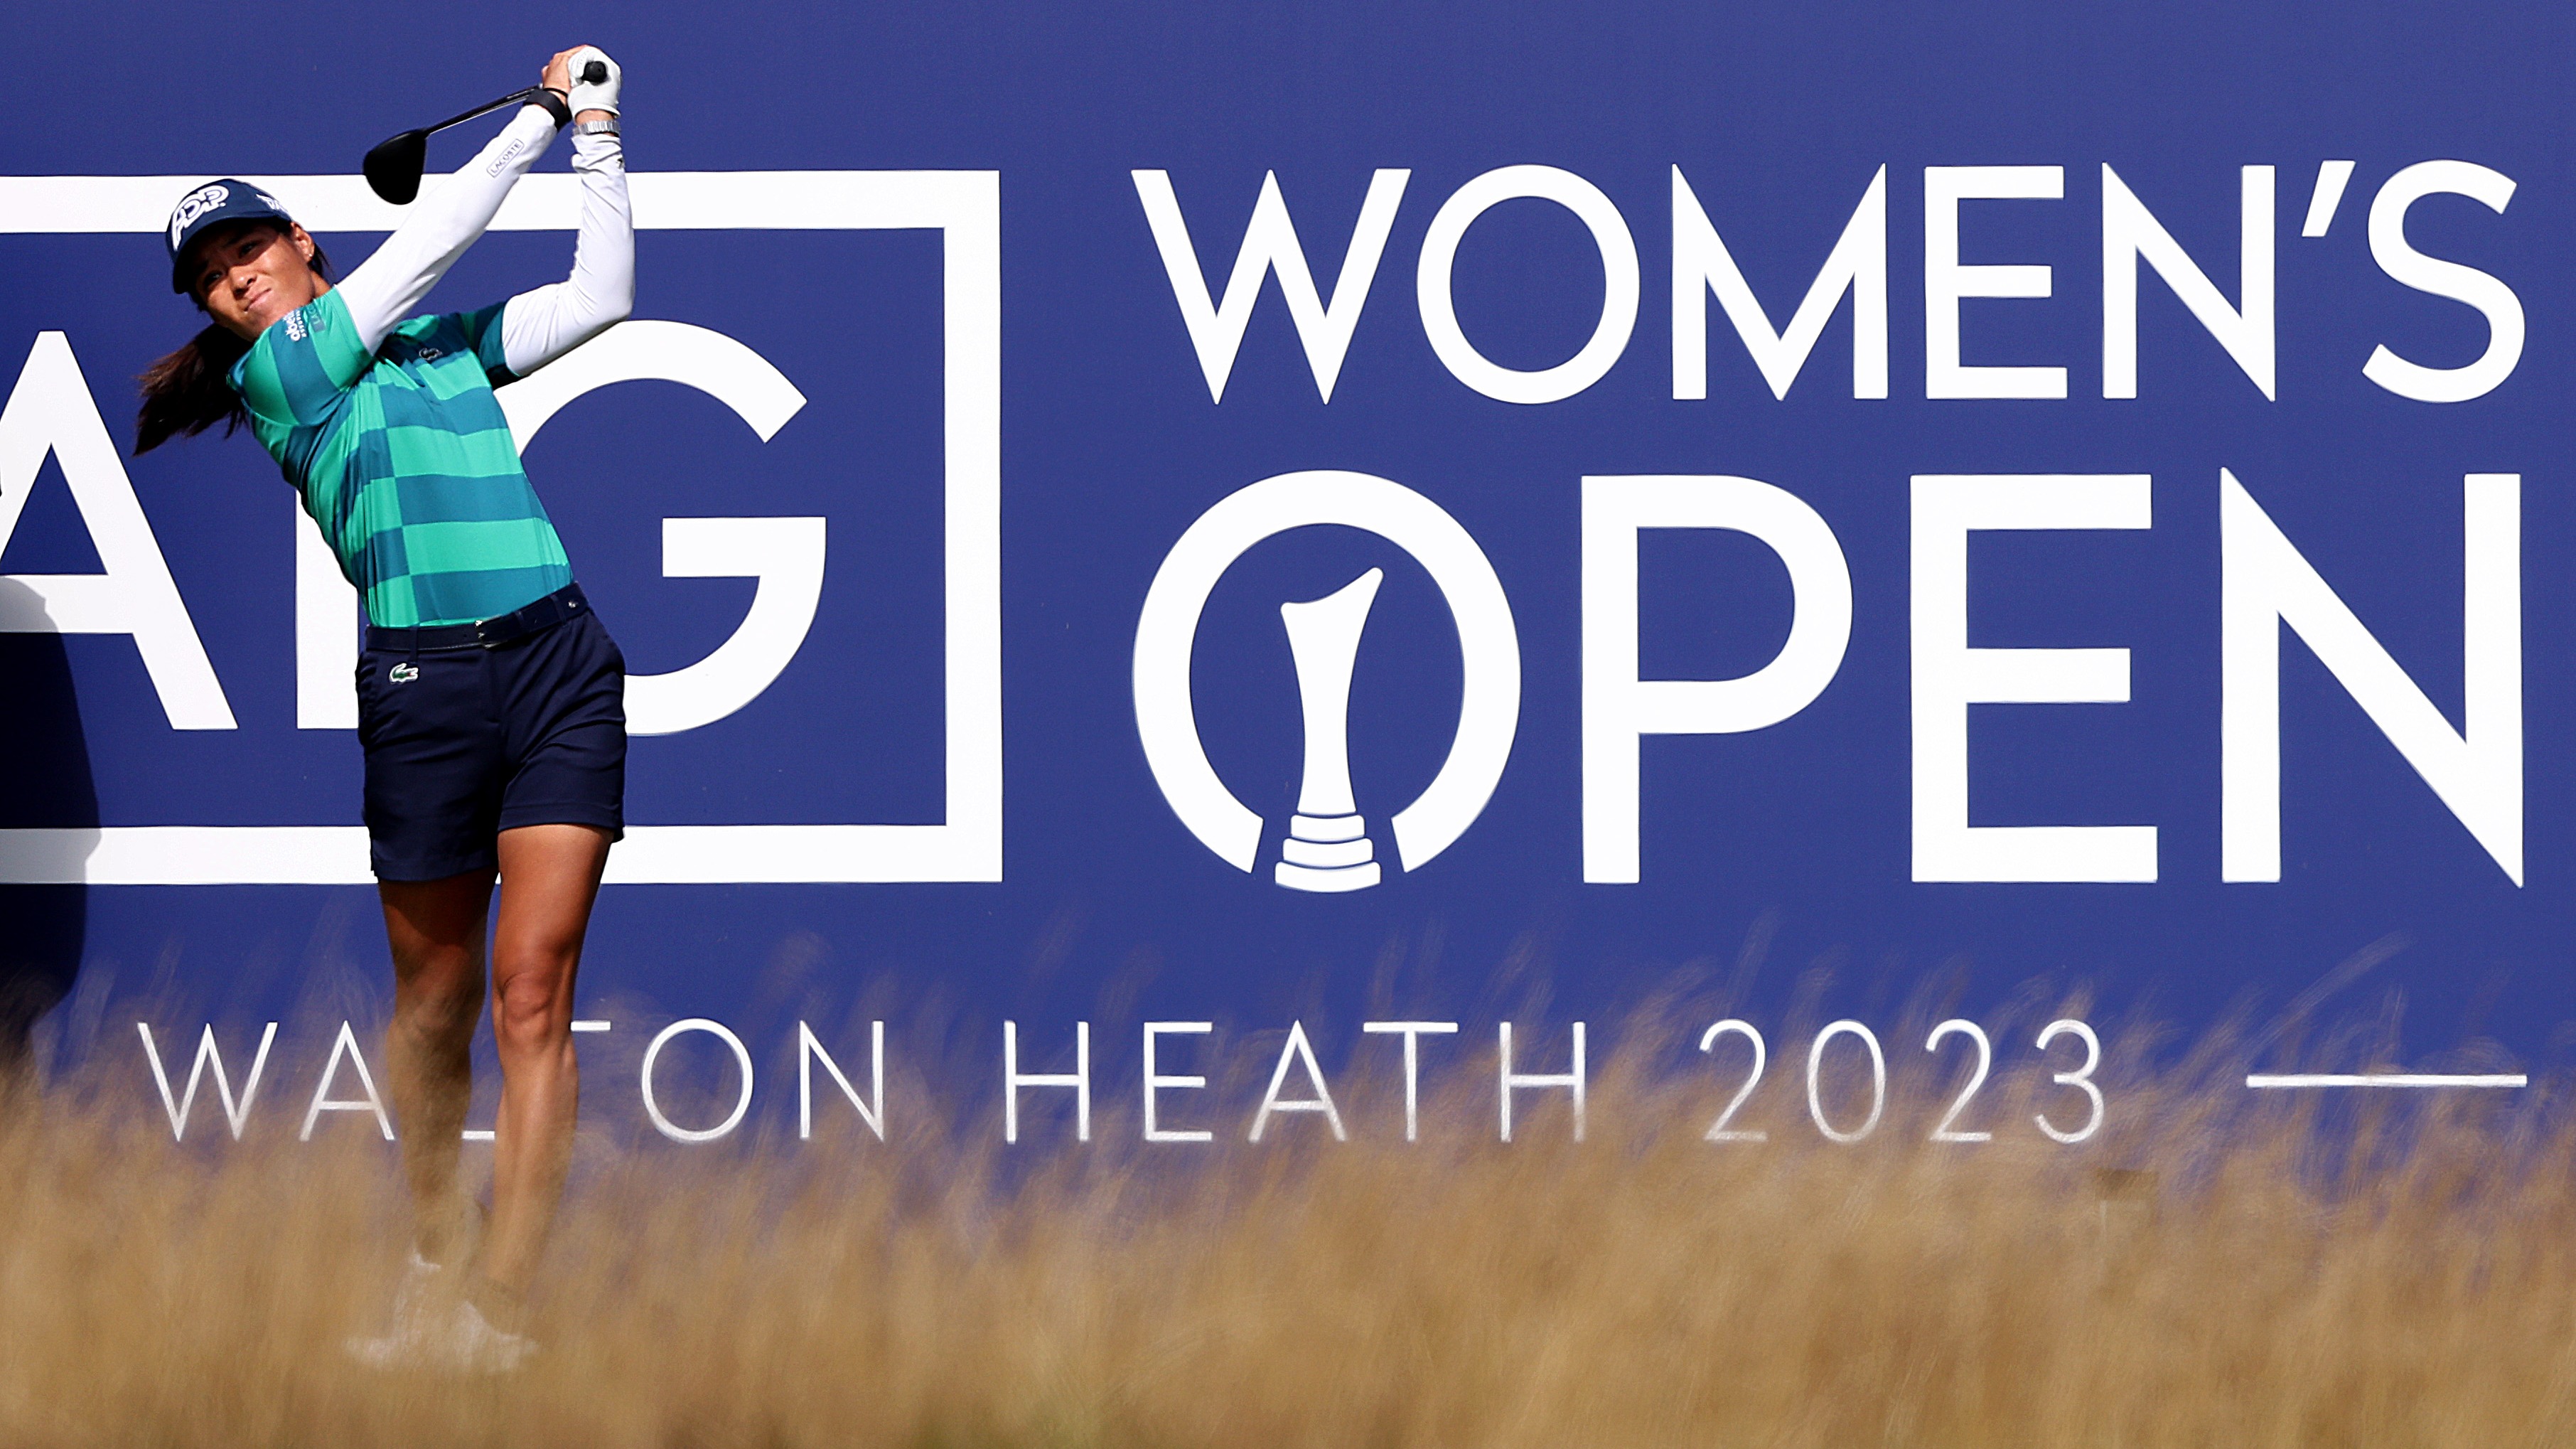 How to Watch the 2023 AIG Women’s Open Championship